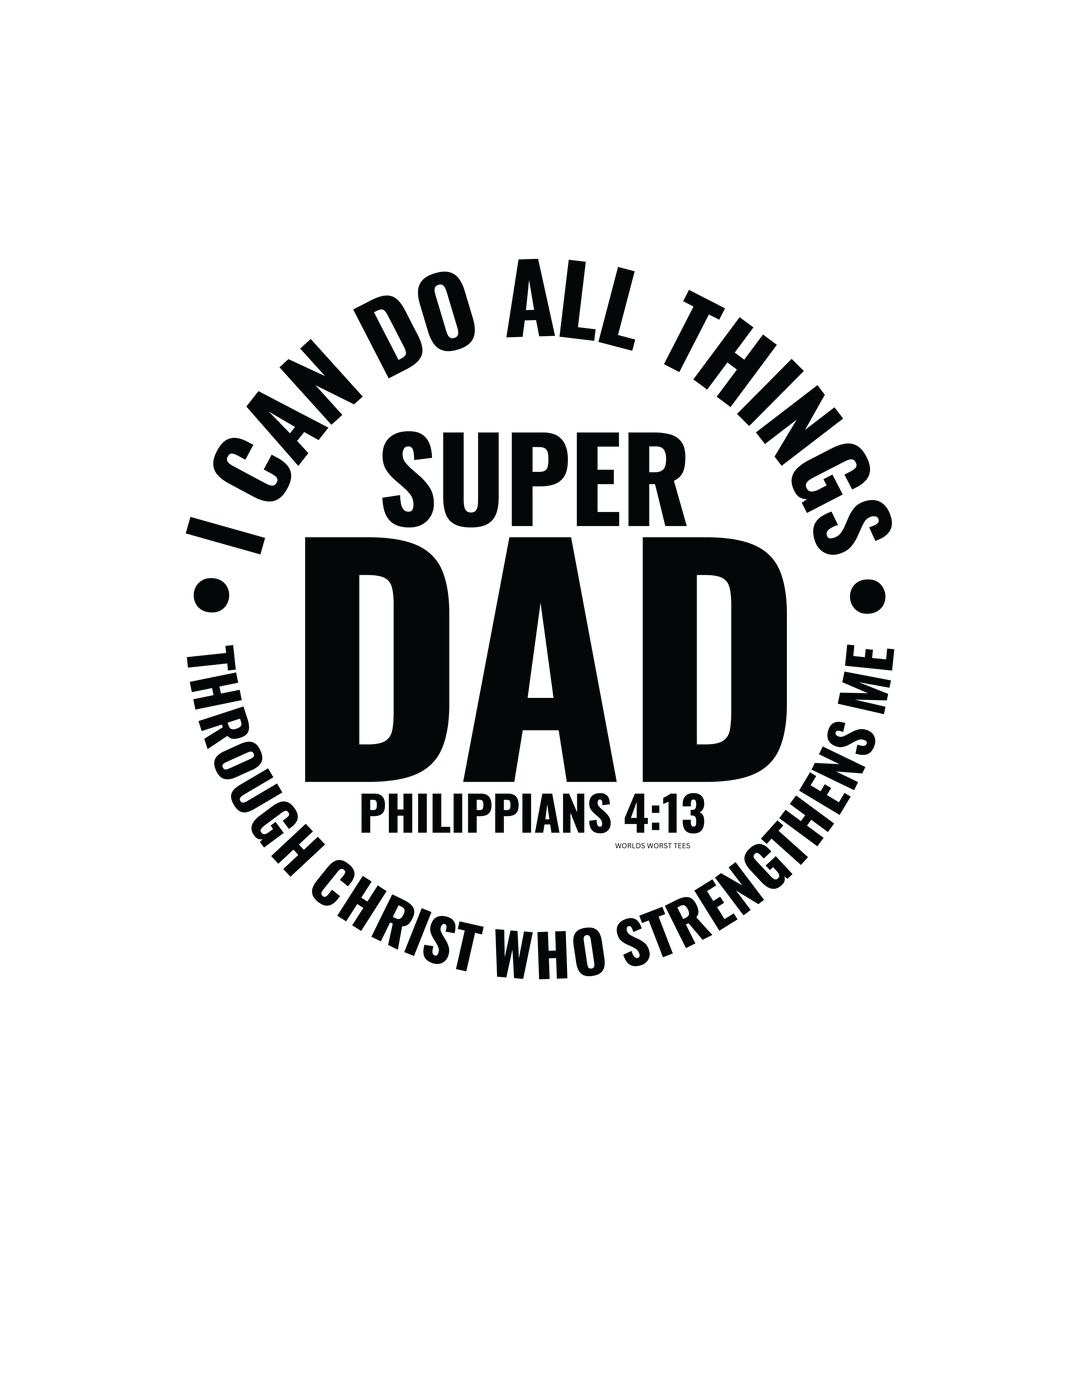 A black graphic tee with white text, featuring Super Dad Tee design. Unisex jersey shirt made of 100% cotton, ribbed knit collar, and tear-away label. Sizes XS to 3XL available.